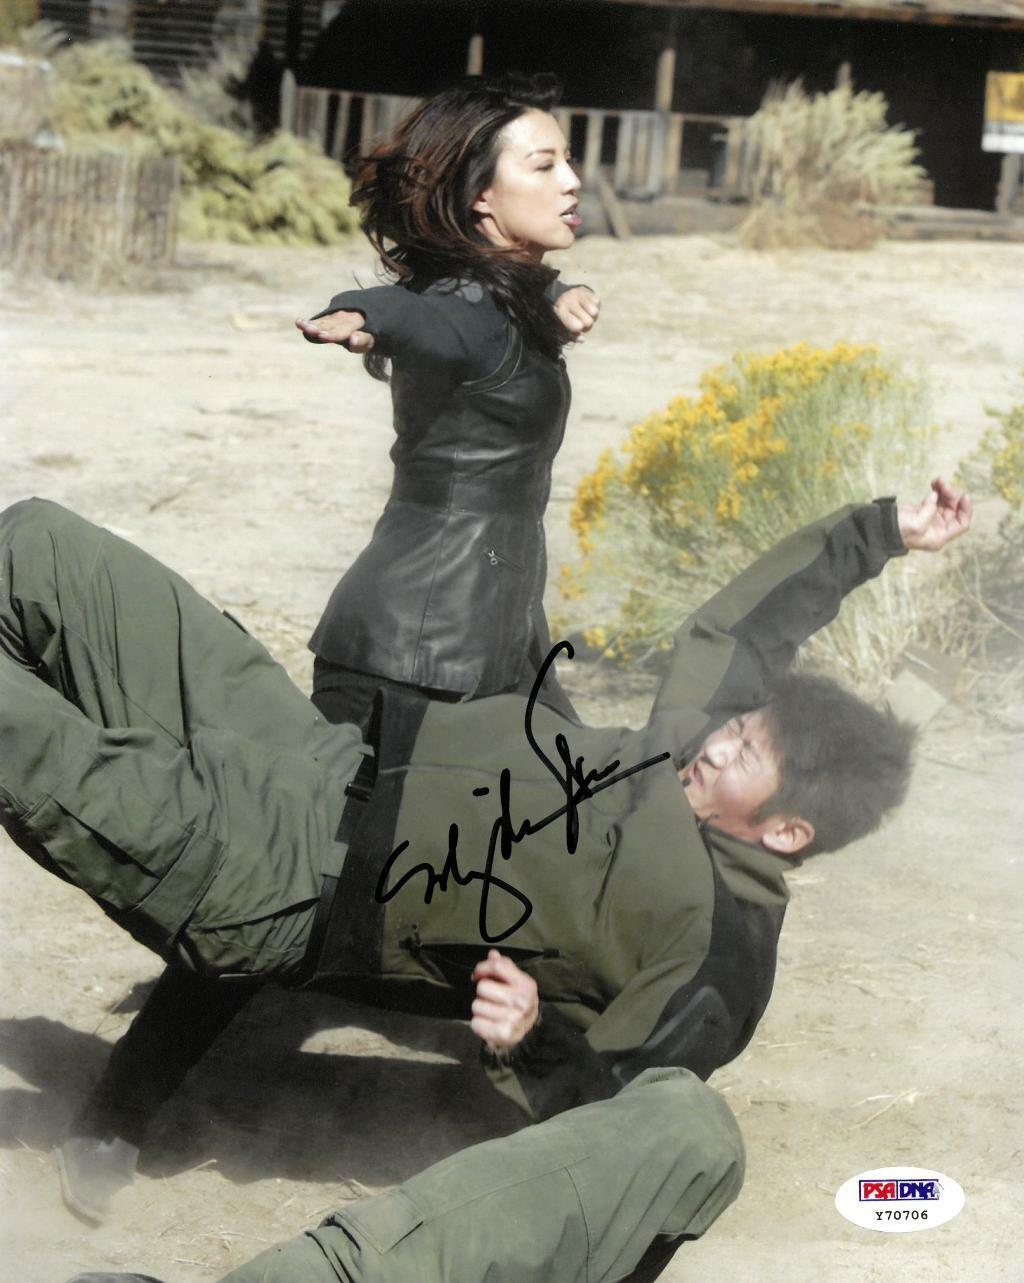 Ming Na Wen Signed Agents of Shield Autographed 8x10 Photo Poster painting PSA/DNA #Y70706